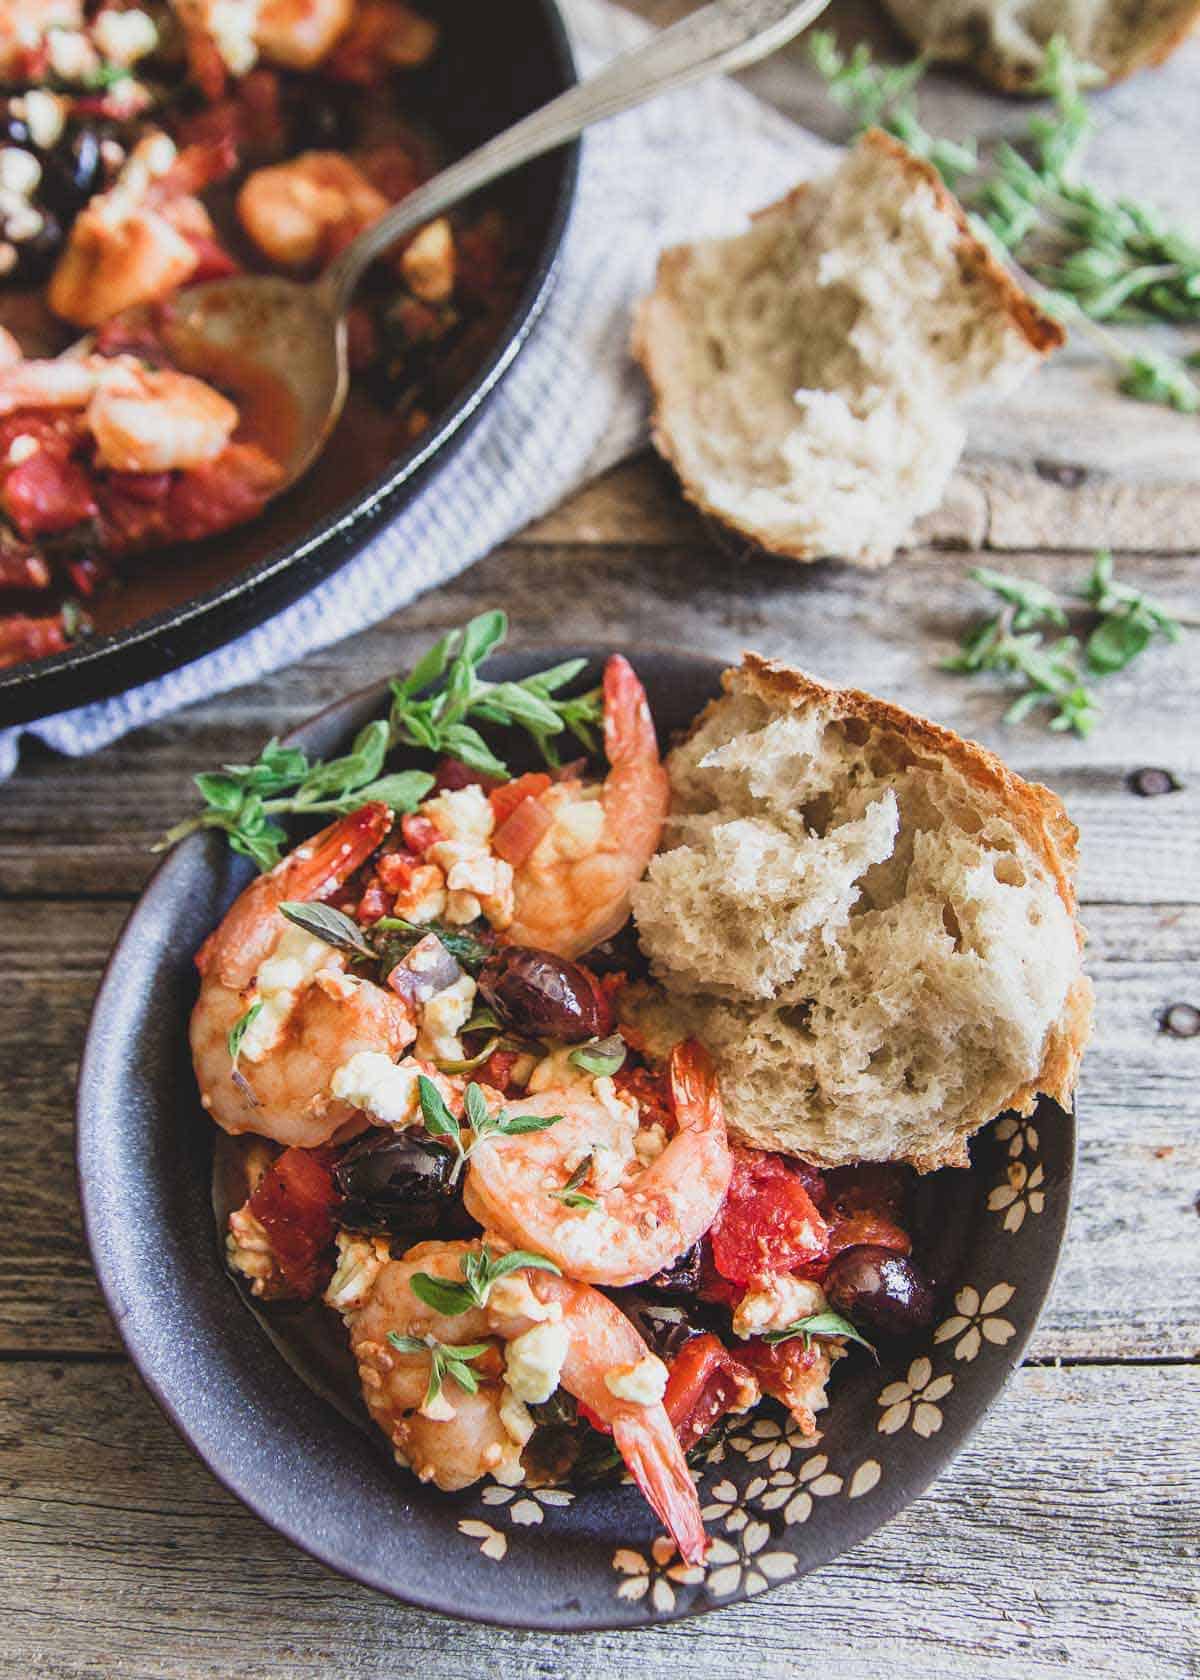 This Greek shrimp skillet is an easy 30 minute meal with tomatoes, spinach, Kalamata olives, feta and lots of fresh oregano and lemon flavor. / This Greek shrimp skillet is an easy 30 minute meal with tomatoes, spinach, Kalamata olives, feta and lots of fresh oregano and lemon flavor.
